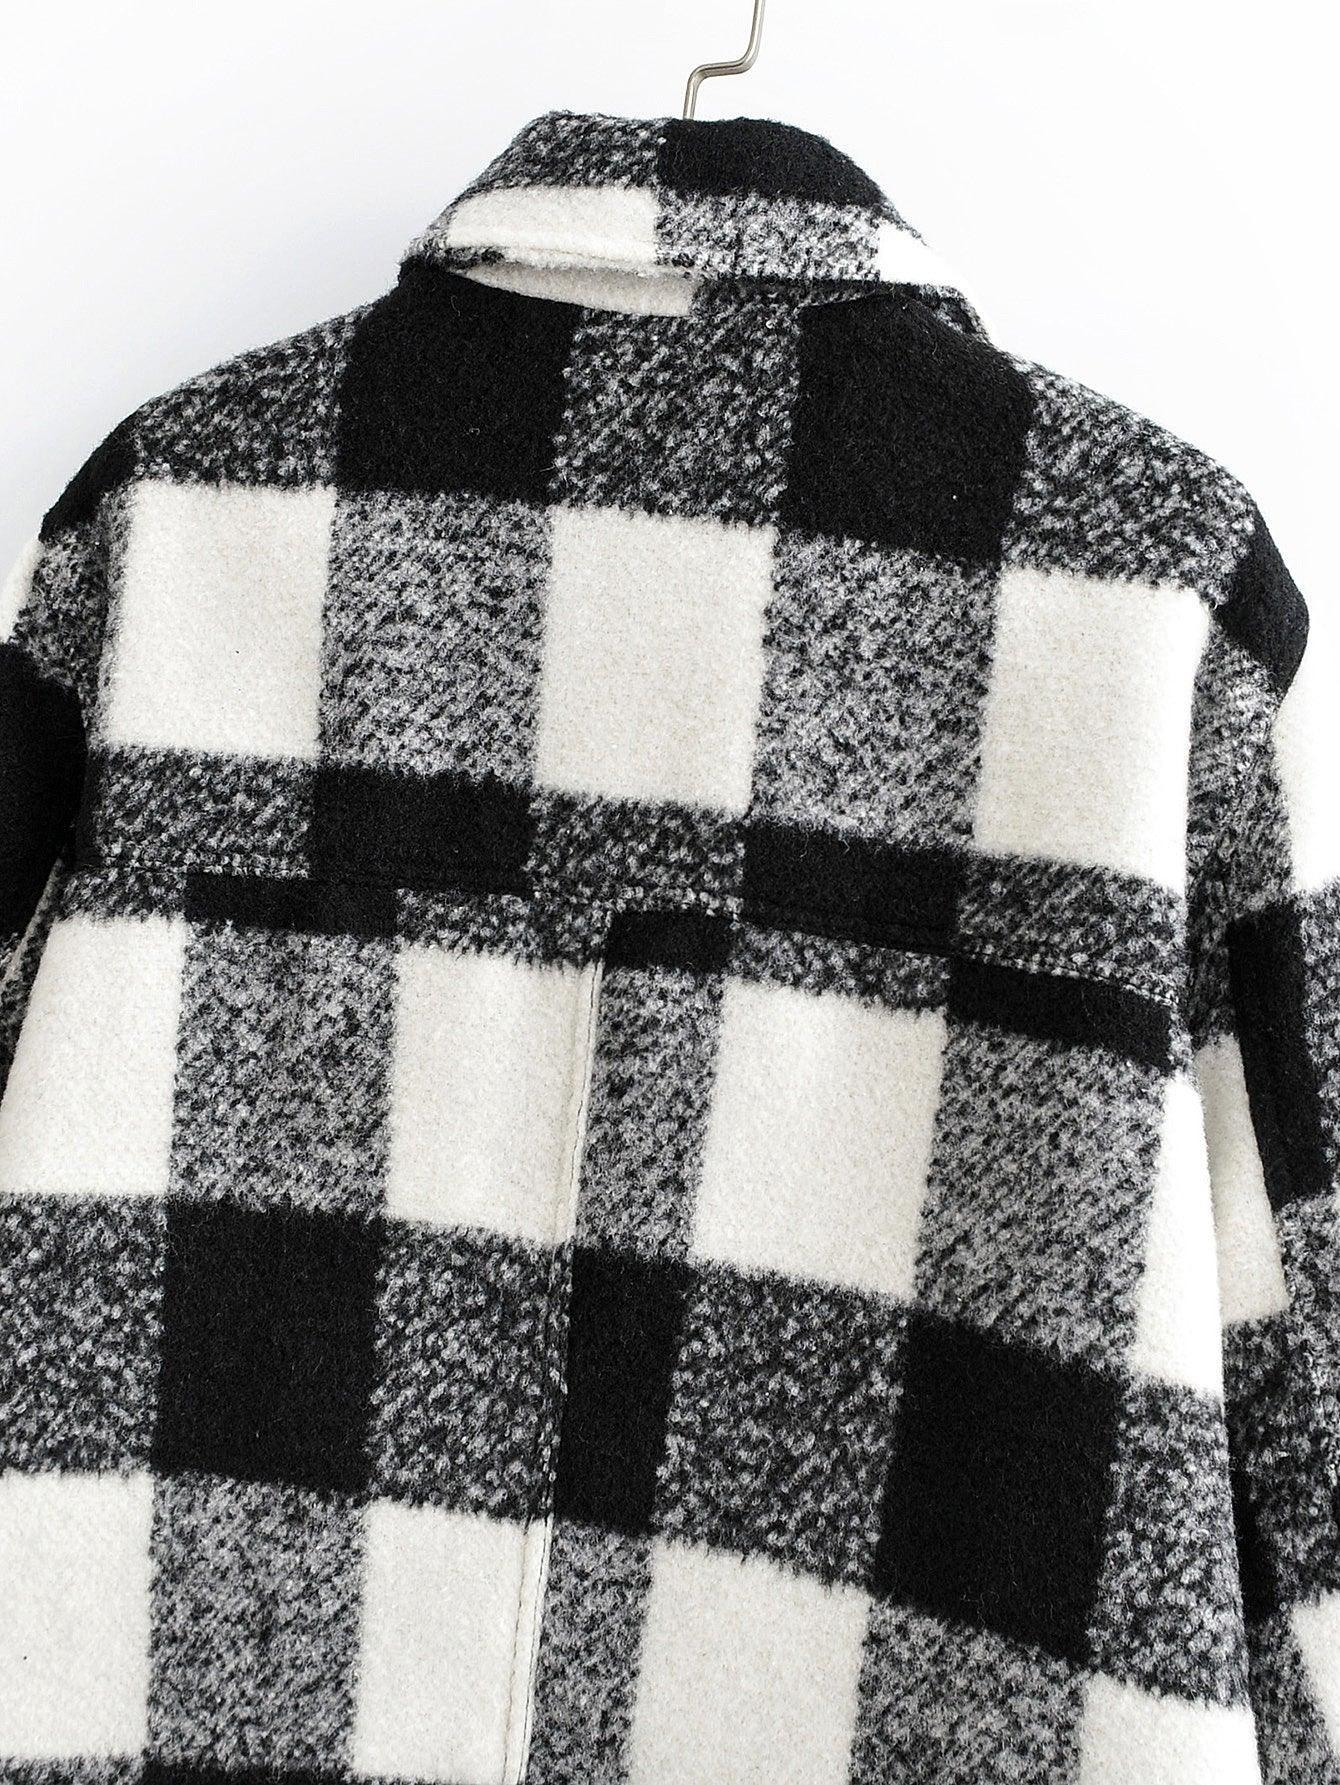 Black and White Plaid Jacket - Perfect for Fall and Winter - ForVanity jackets, jackets & coats, women's clothing, wool Jacket